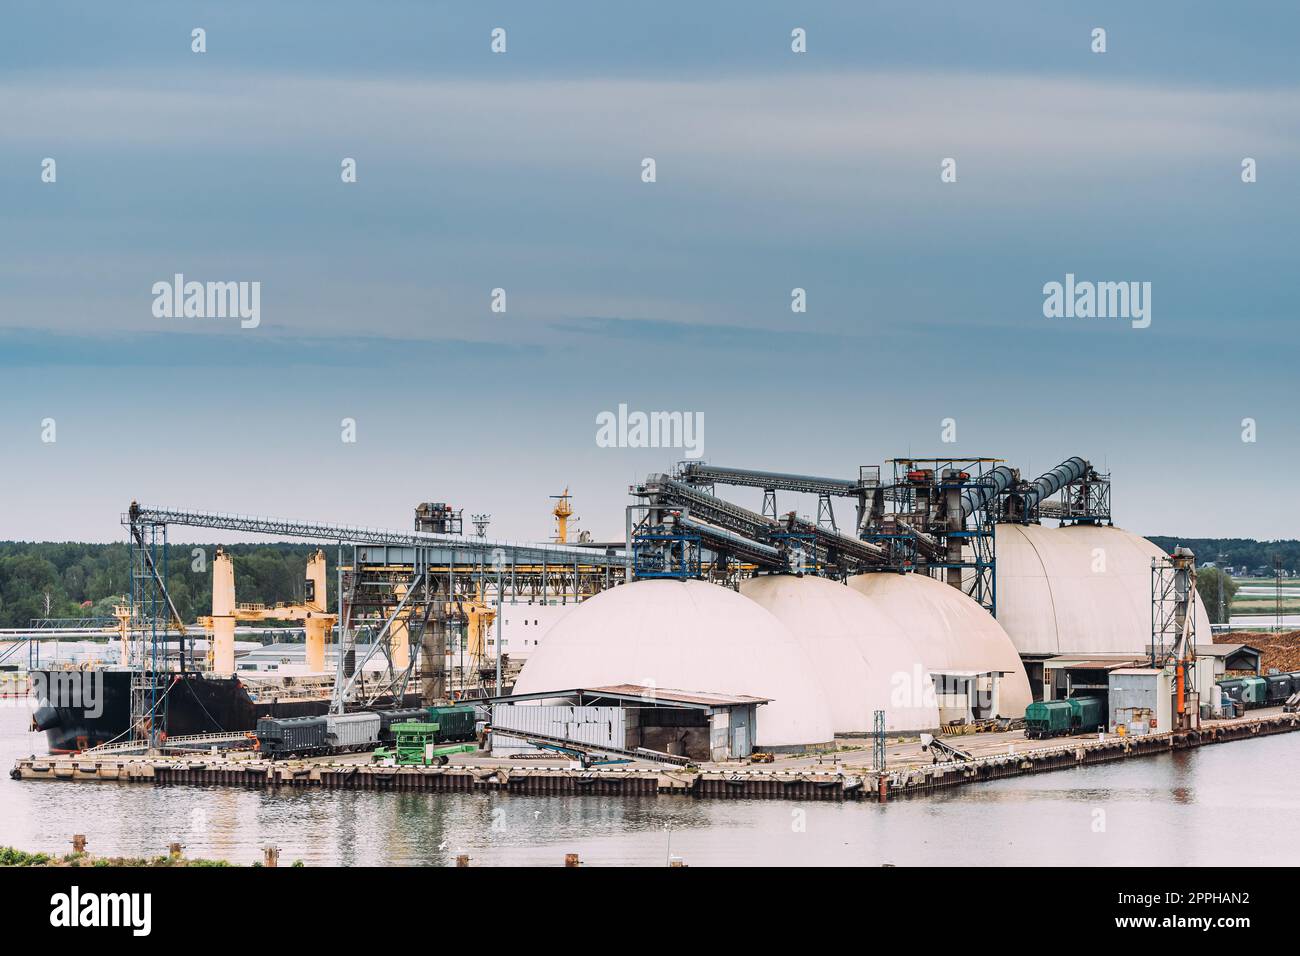 Chemical Storage Tanks And Storage Tanks Oil Refinery In Port. Industrial Port Terminal Stock Photo